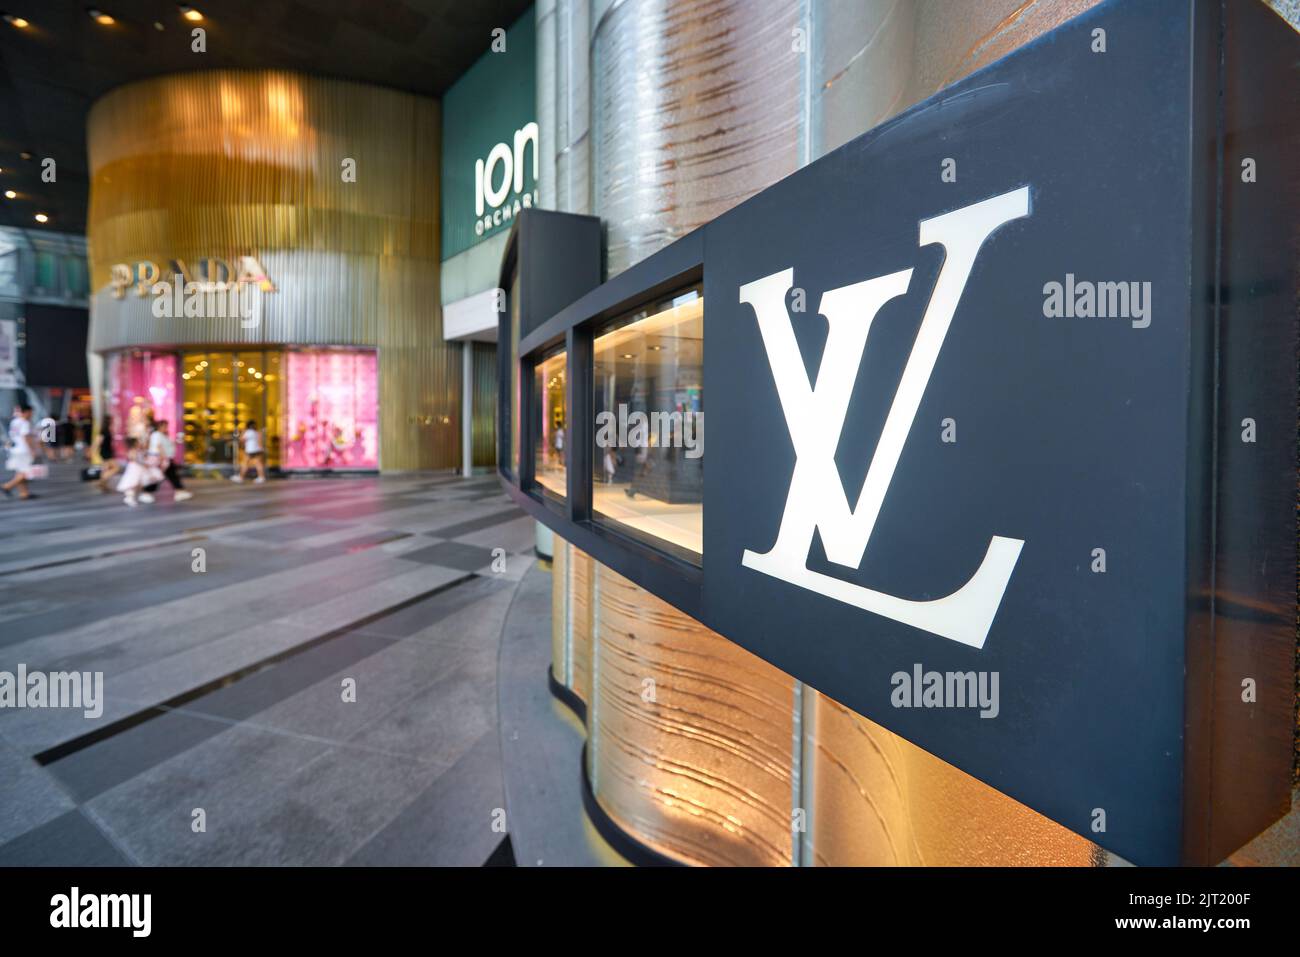 Louis vuitton neon sign hi-res stock photography and images - Alamy